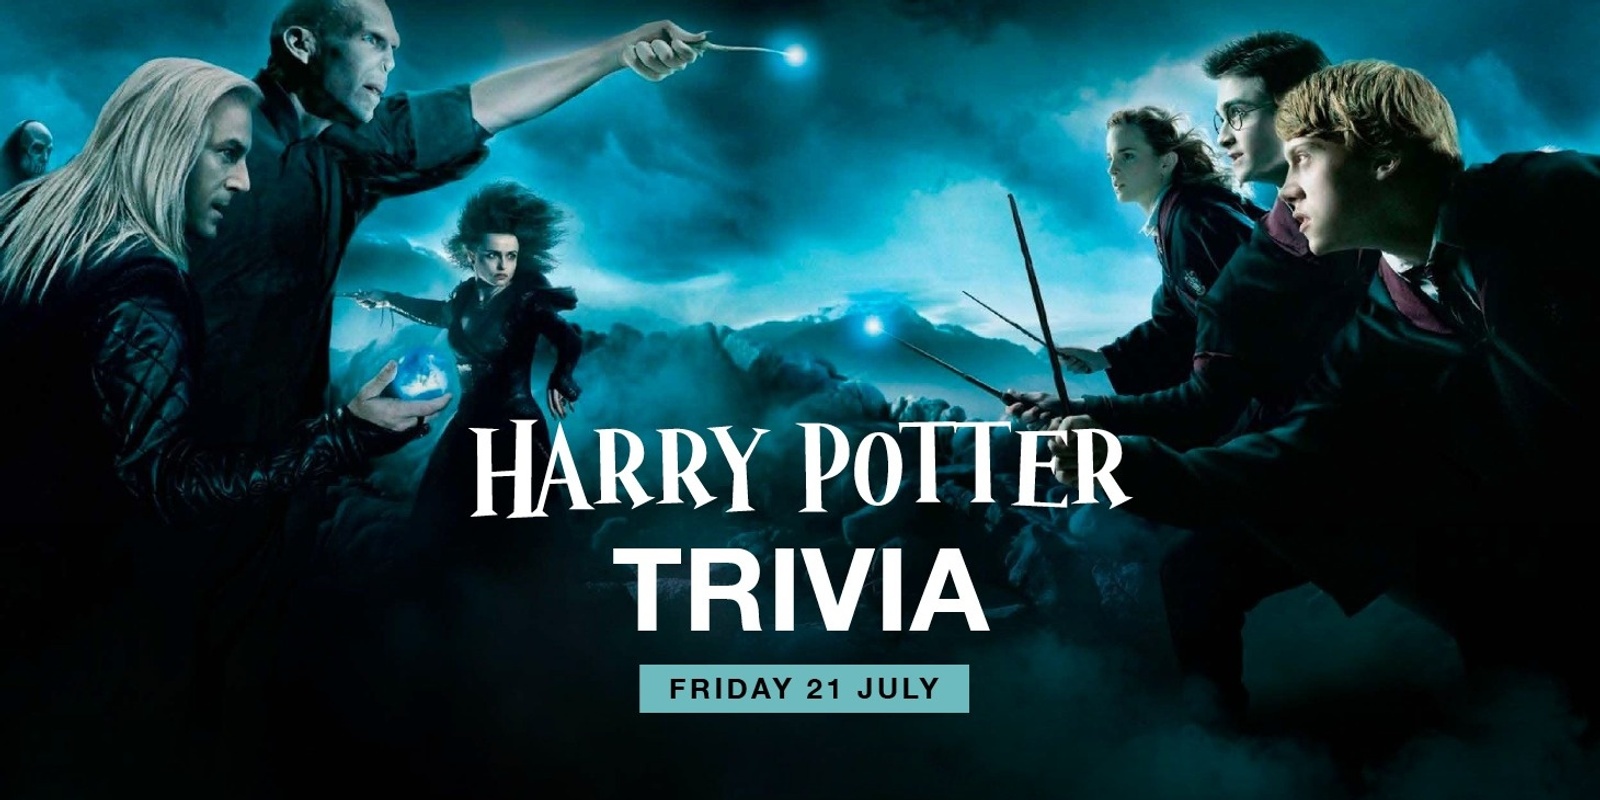 Banner image for Harry Potter Trivia at Harbord Diggers